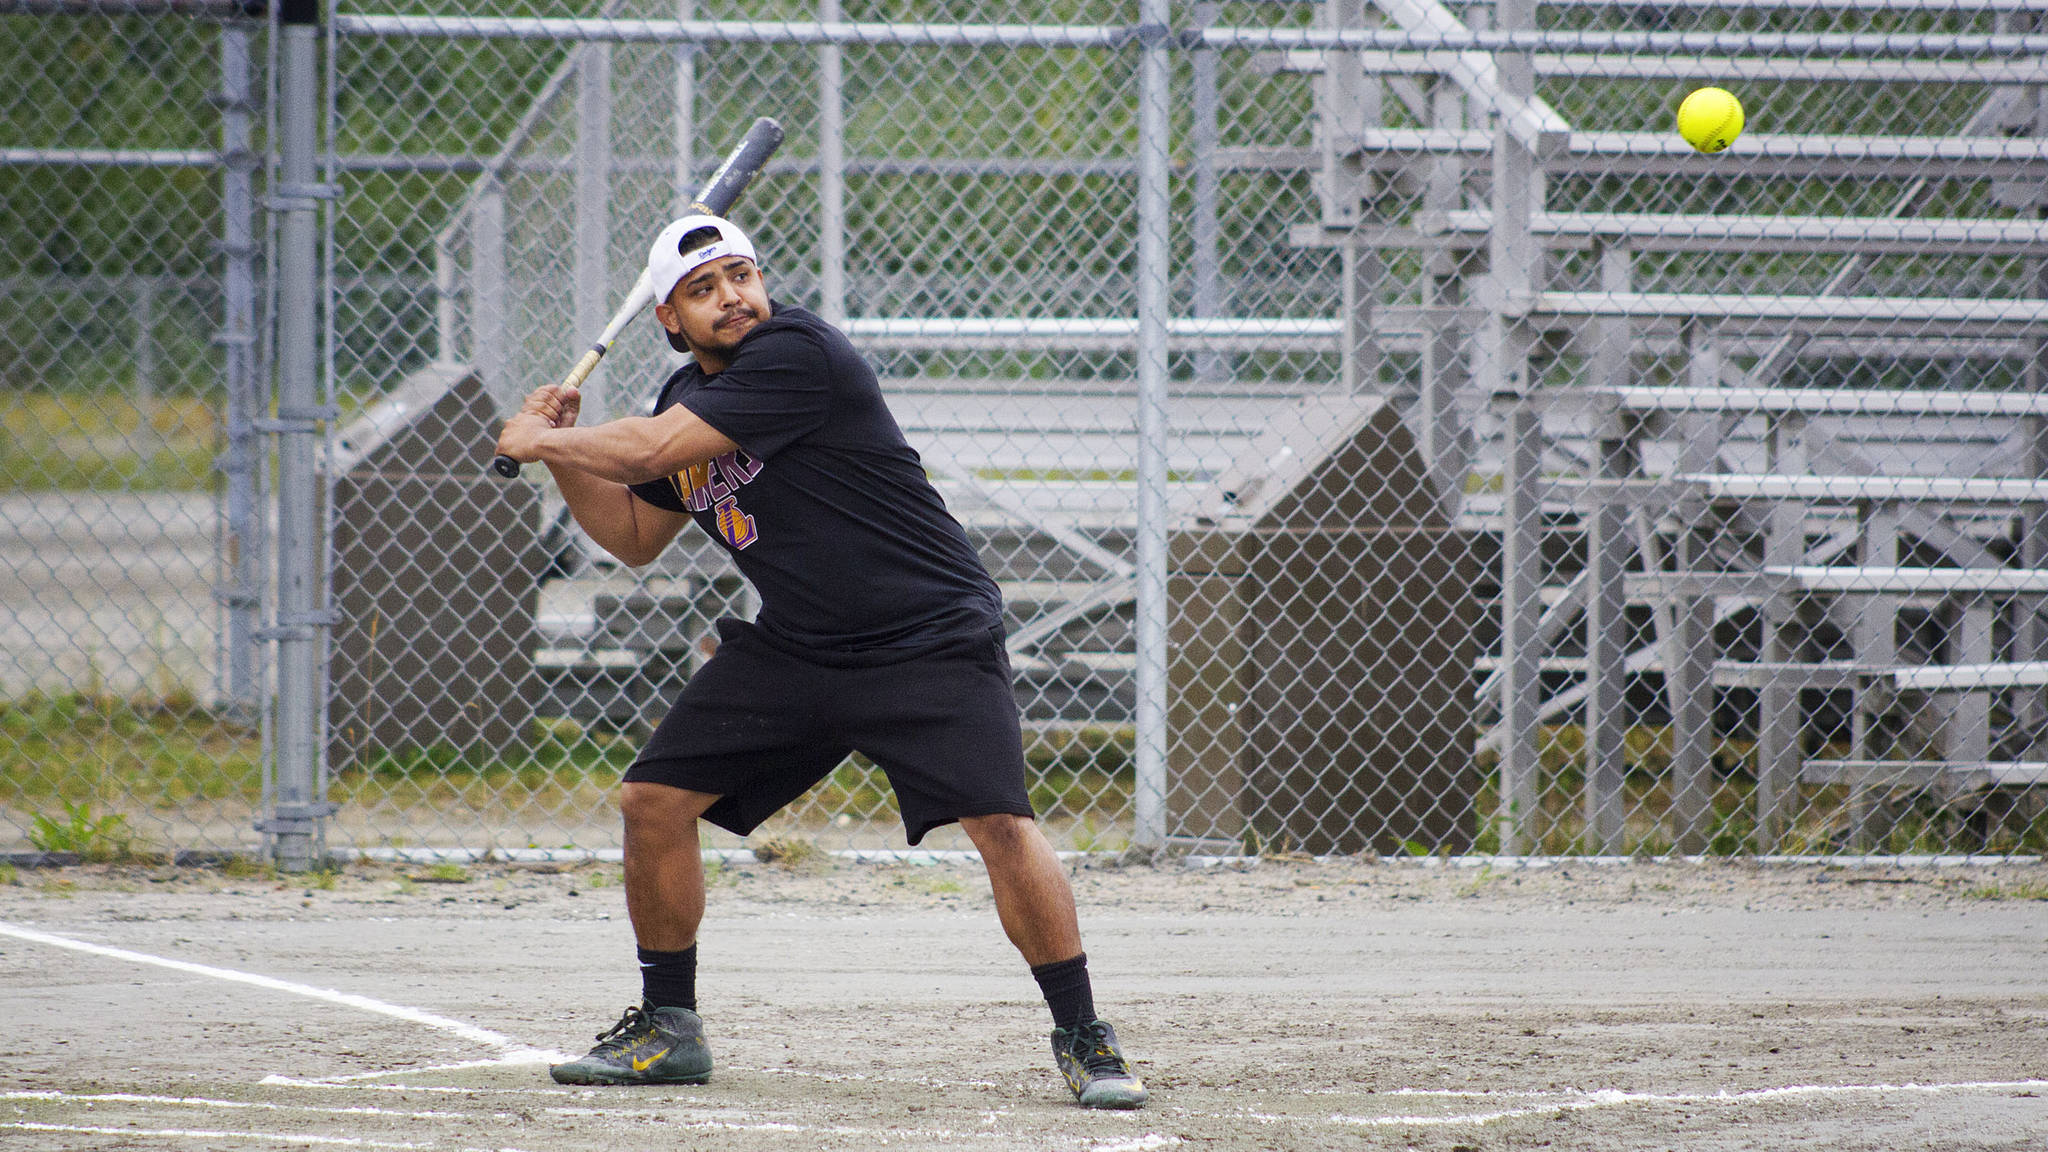 Jonathon Corona drives a ball into left field during a game over the weekend at the 22nd Annual Coed Softball Benefit Tournament at Dimond Park. (Courtesy Photo | Katie Damien)